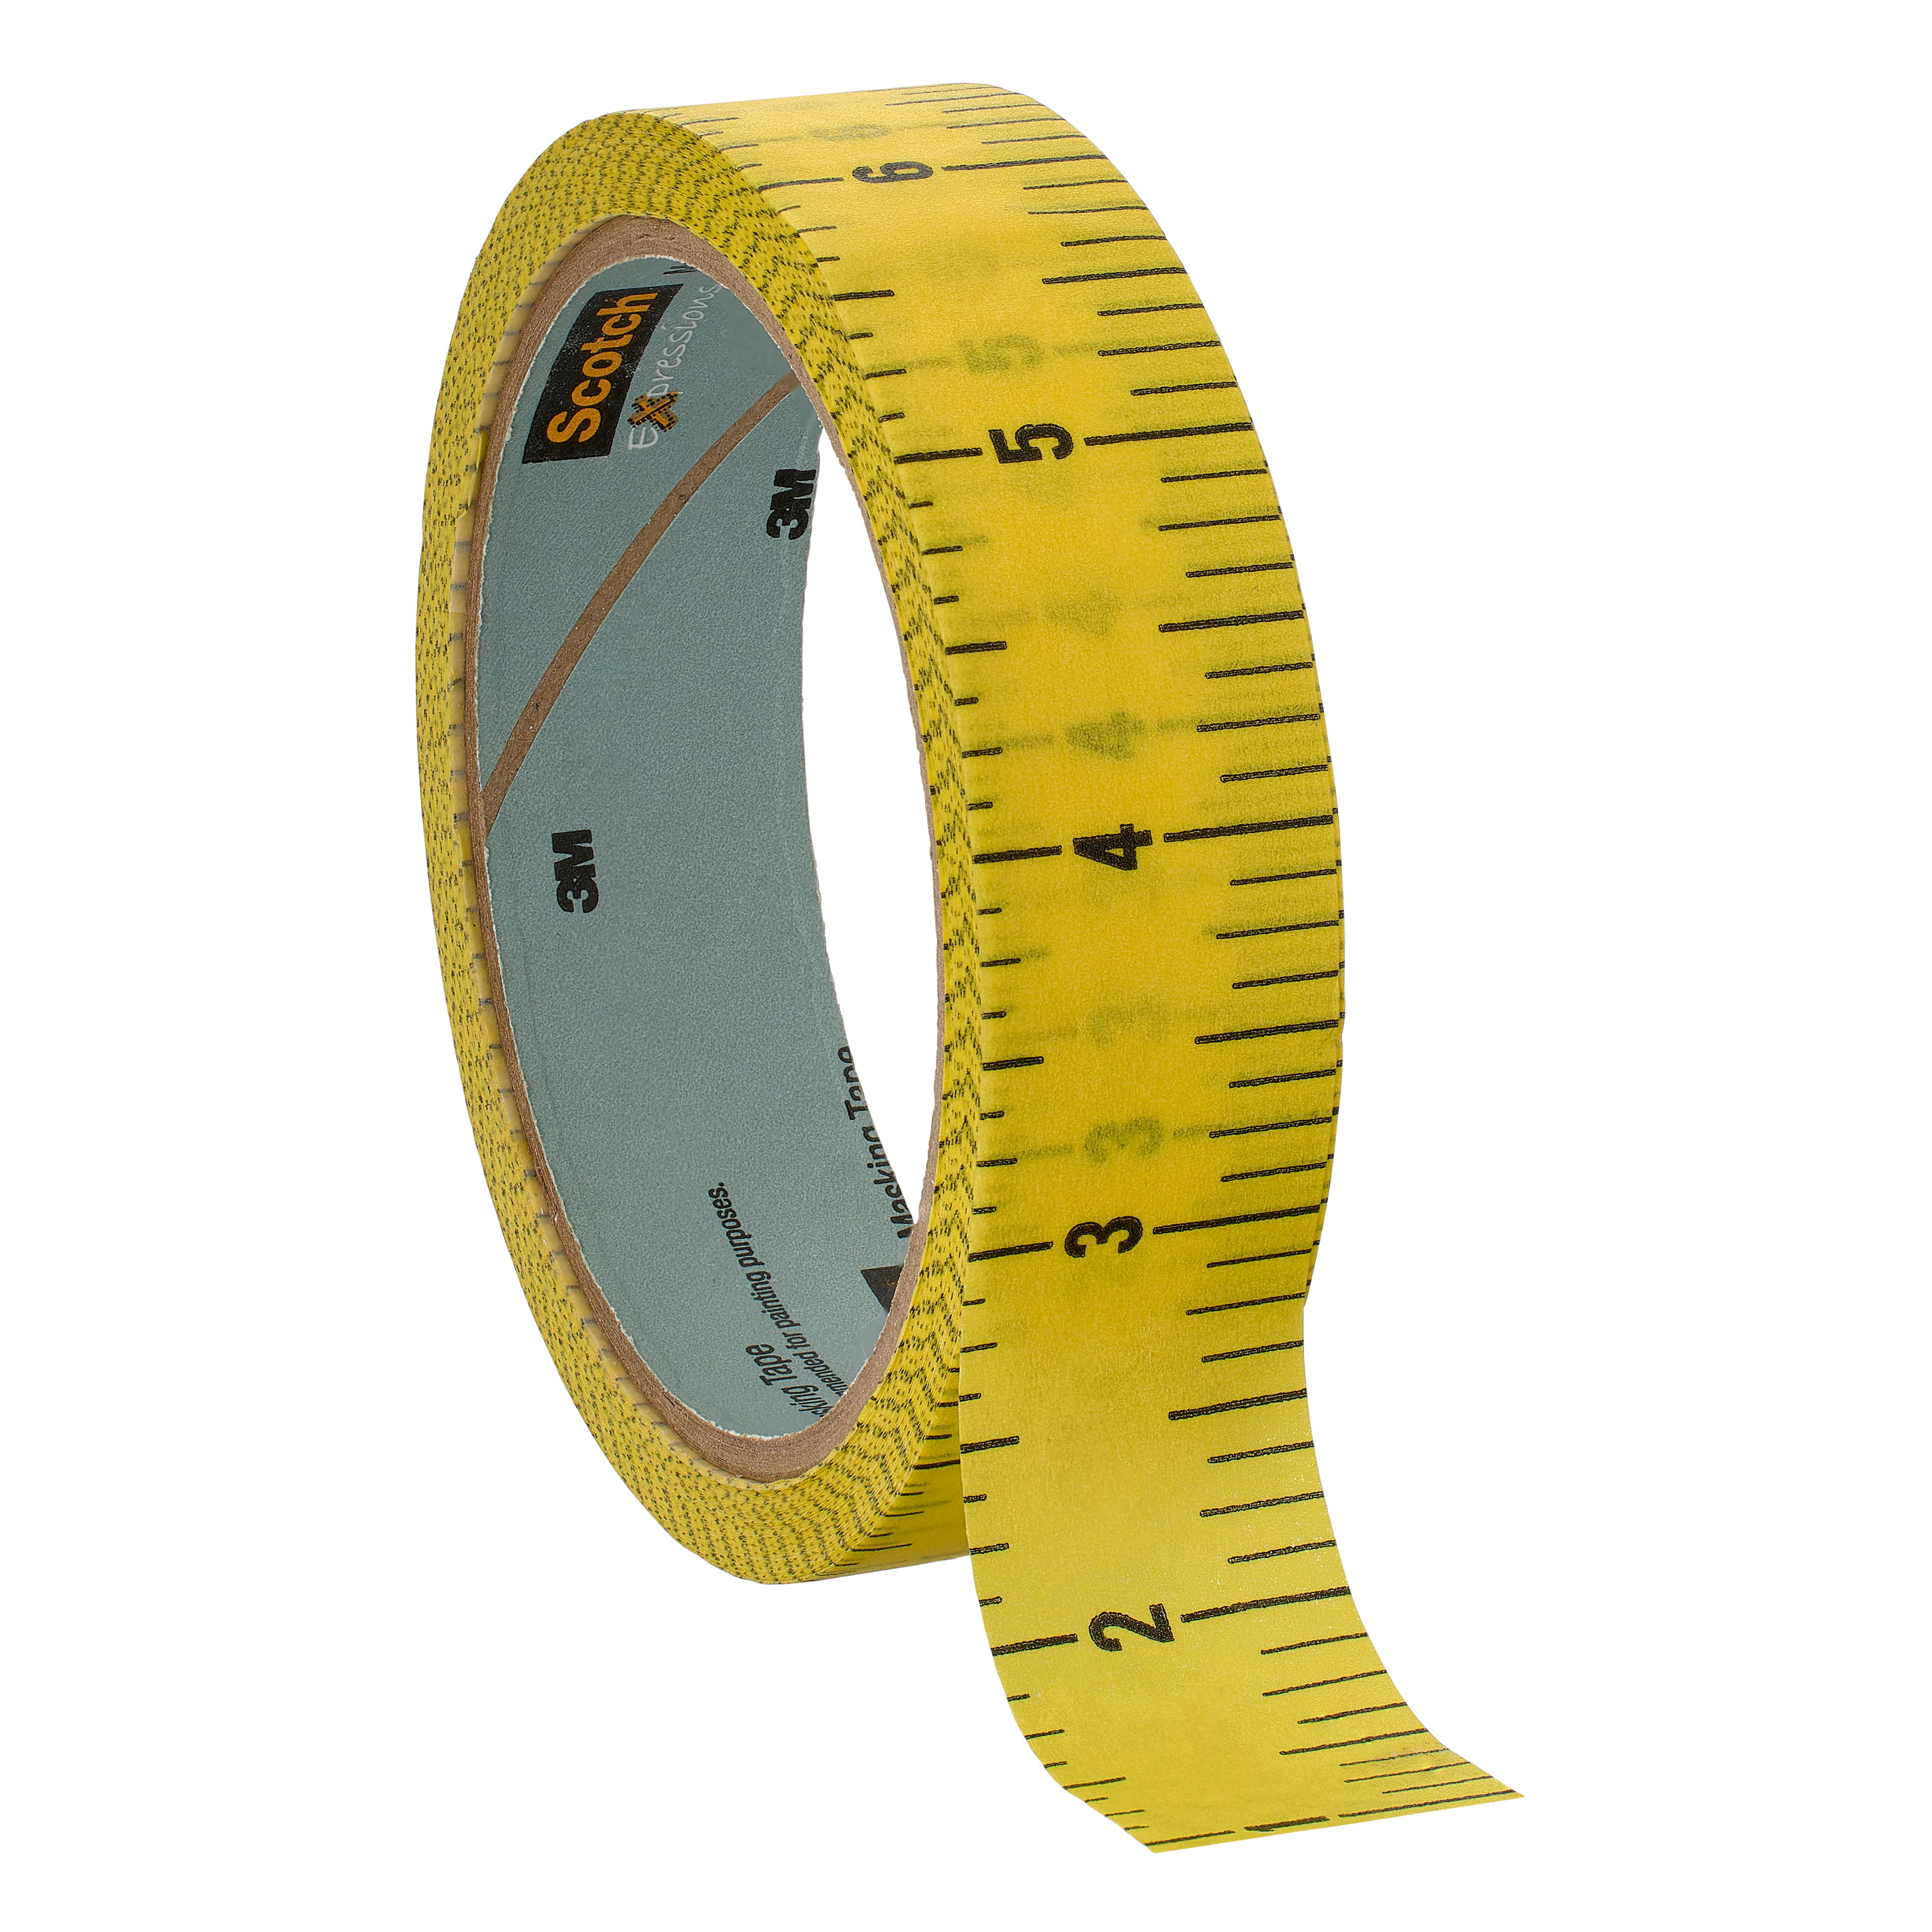 Scotch Masking Tape with Ruler - Bling Your Things - Rhinestones